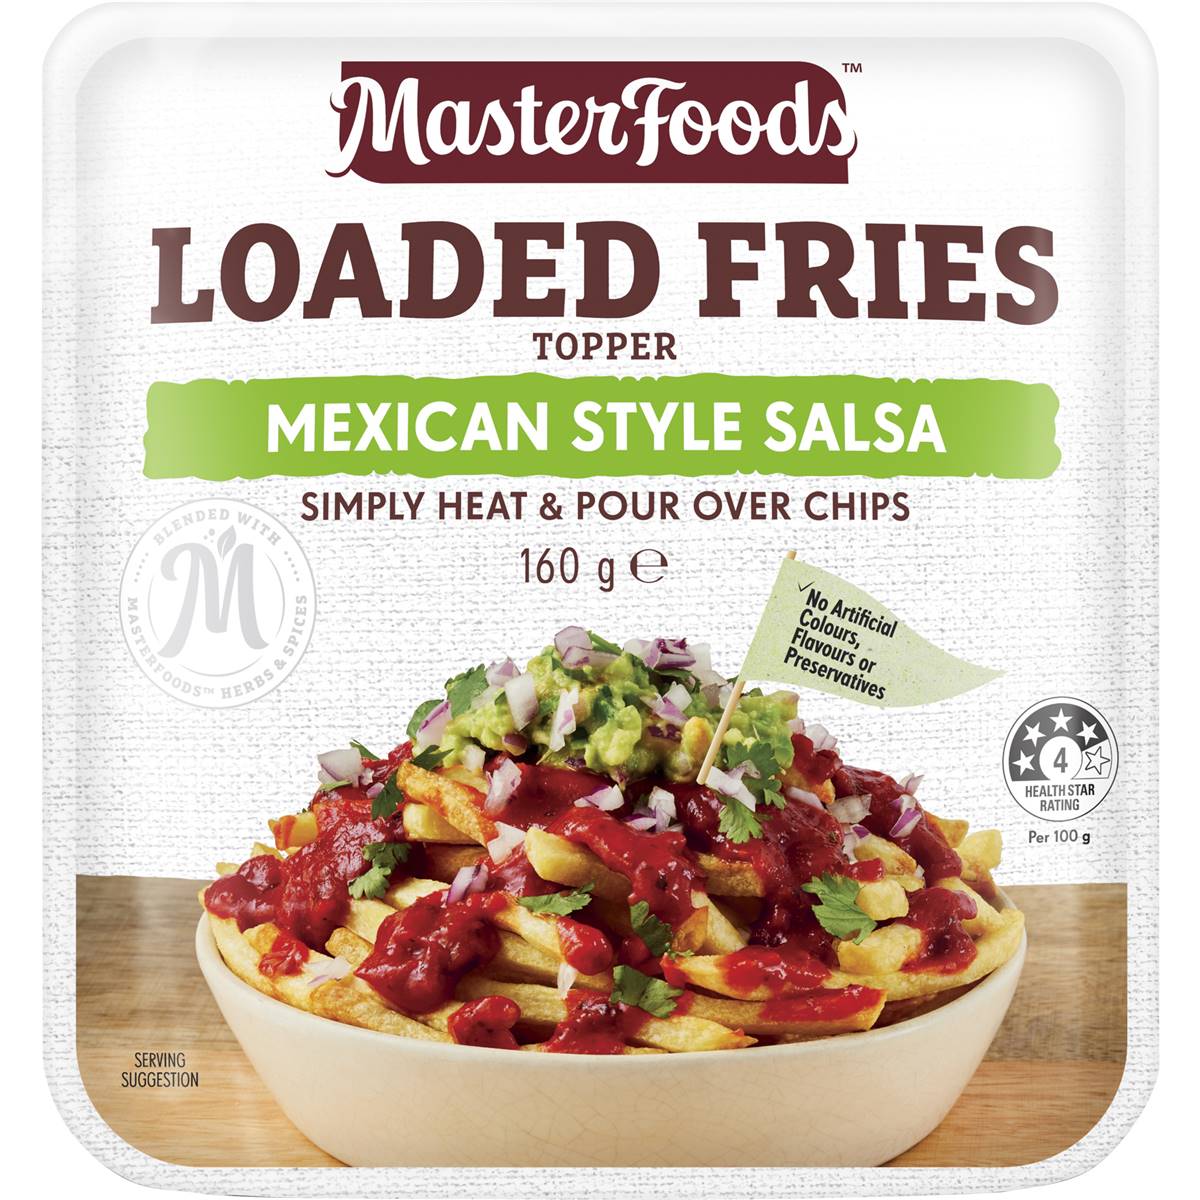 Calories in Masterfoods Loaded Fries Topper Mexican Style Salsa